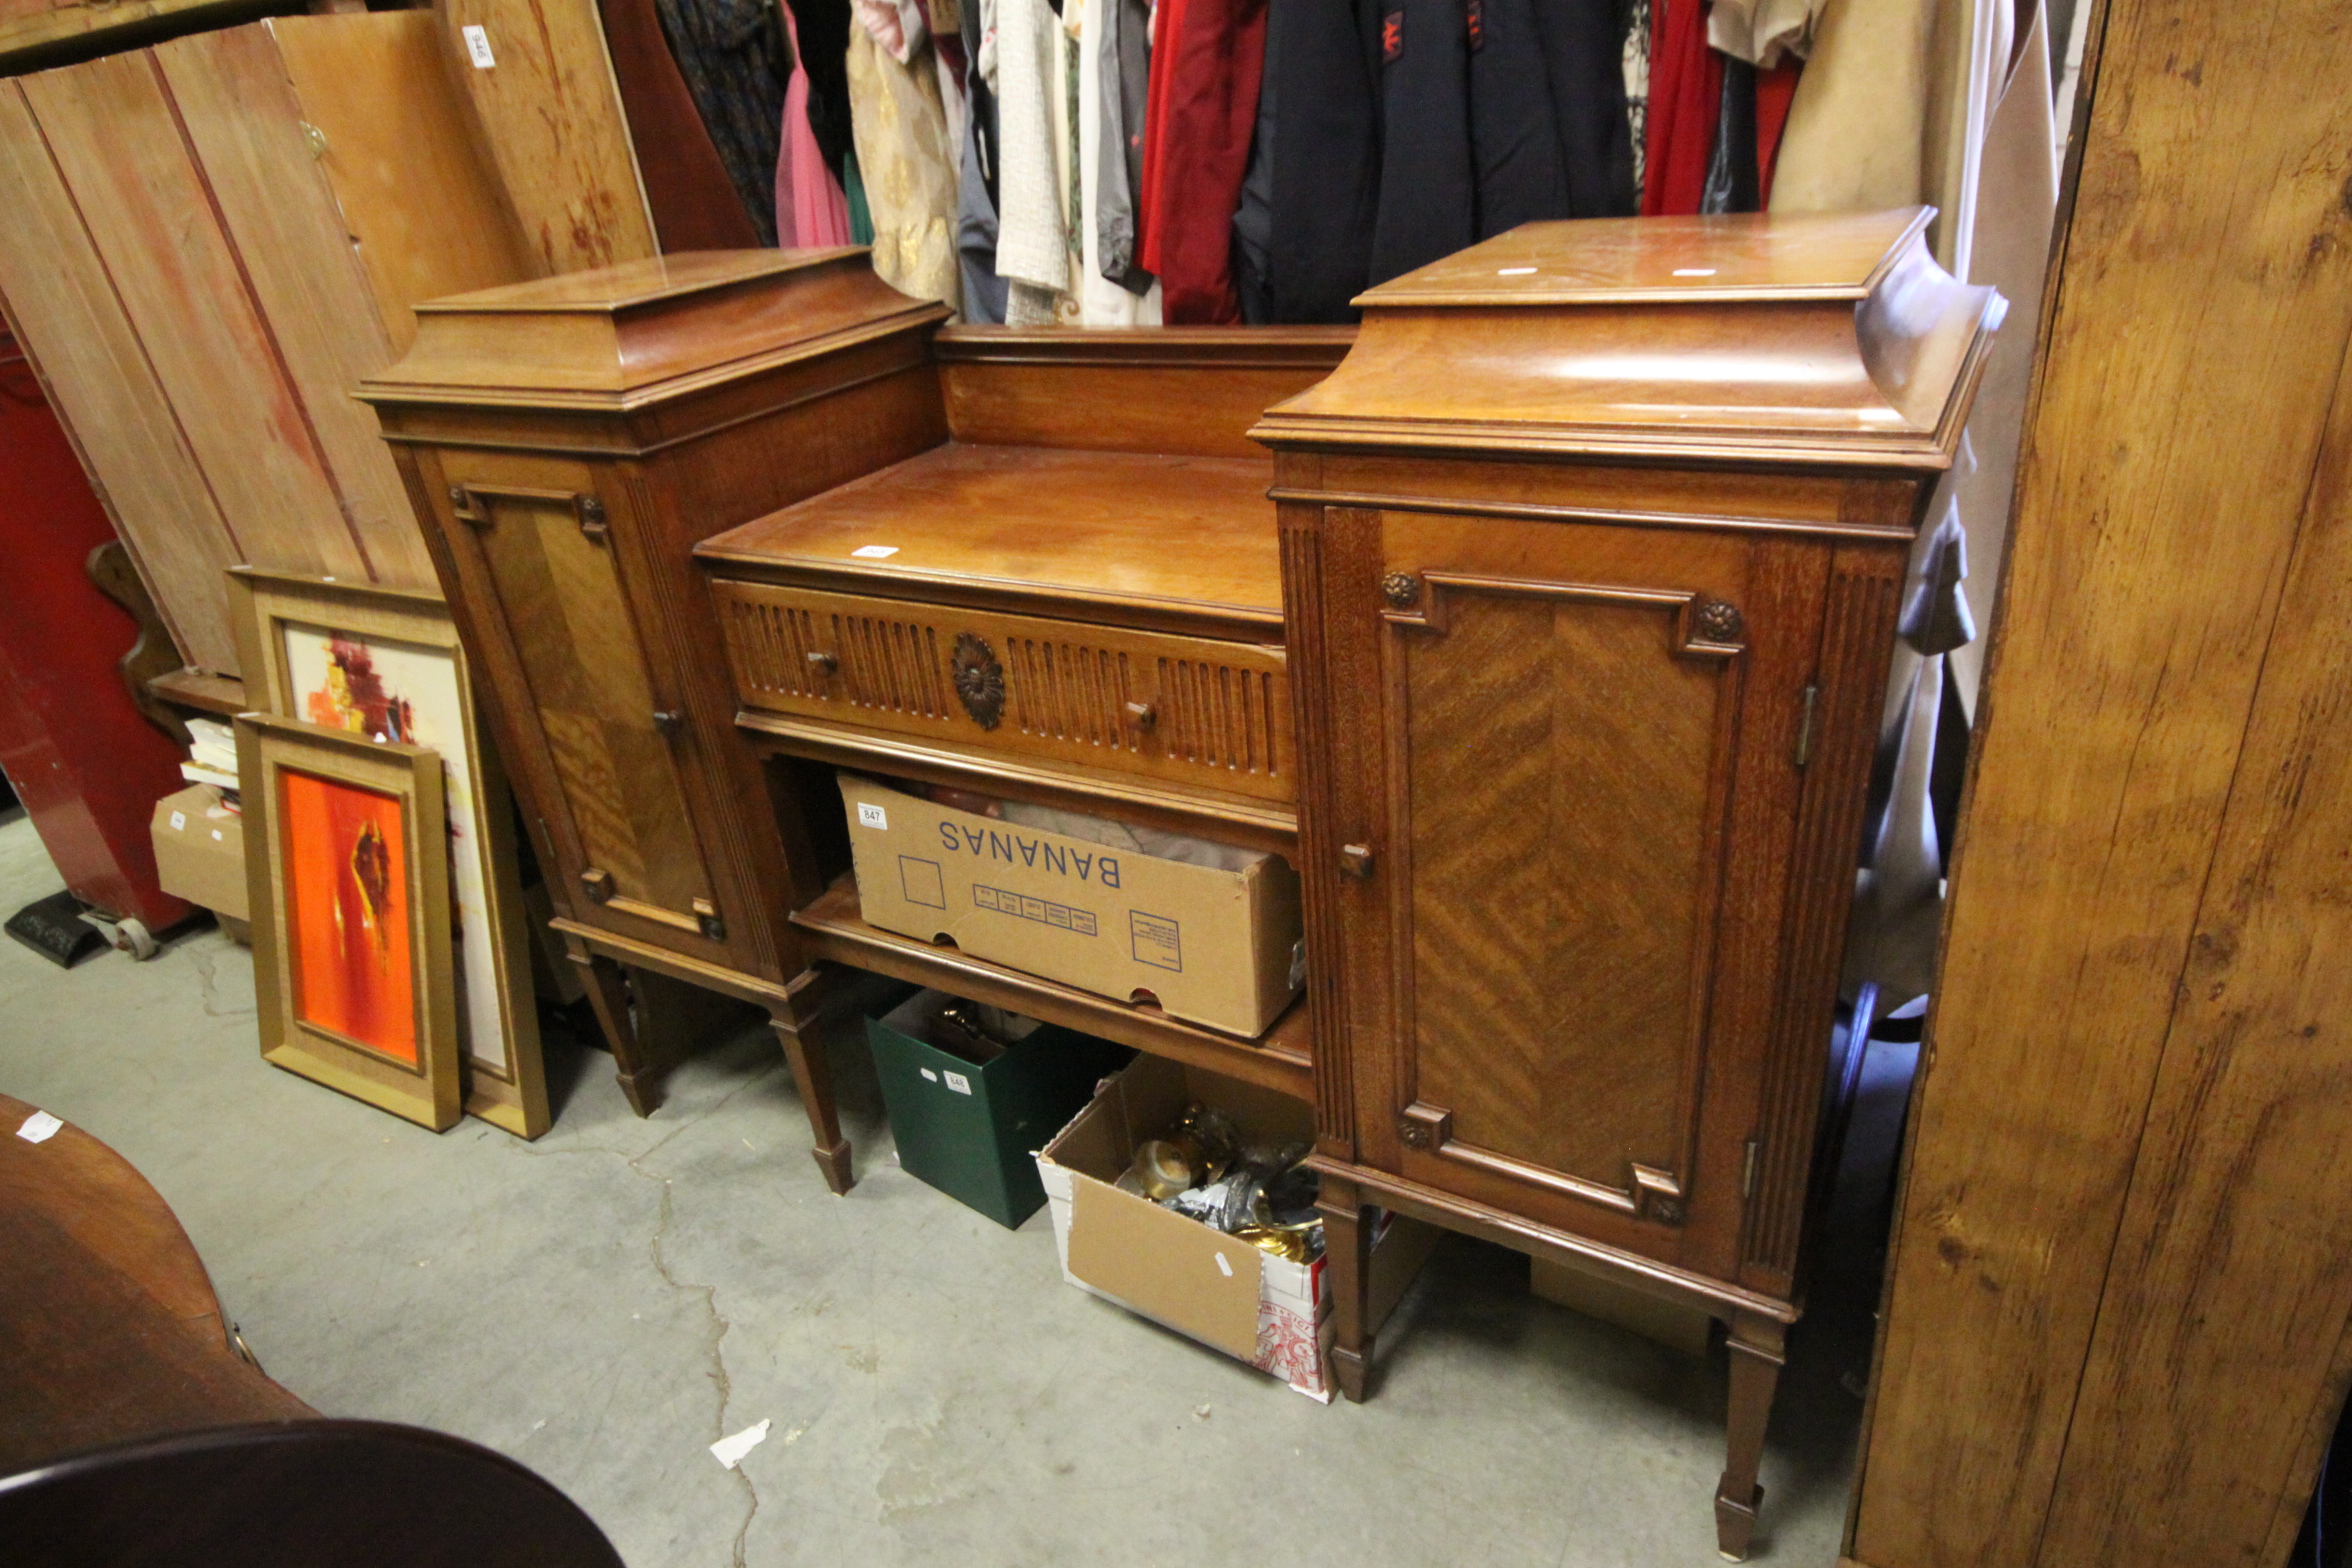 Victorian Mahogany Pedestal Sideboard with central drawer over a shelf flanked by two pedestals